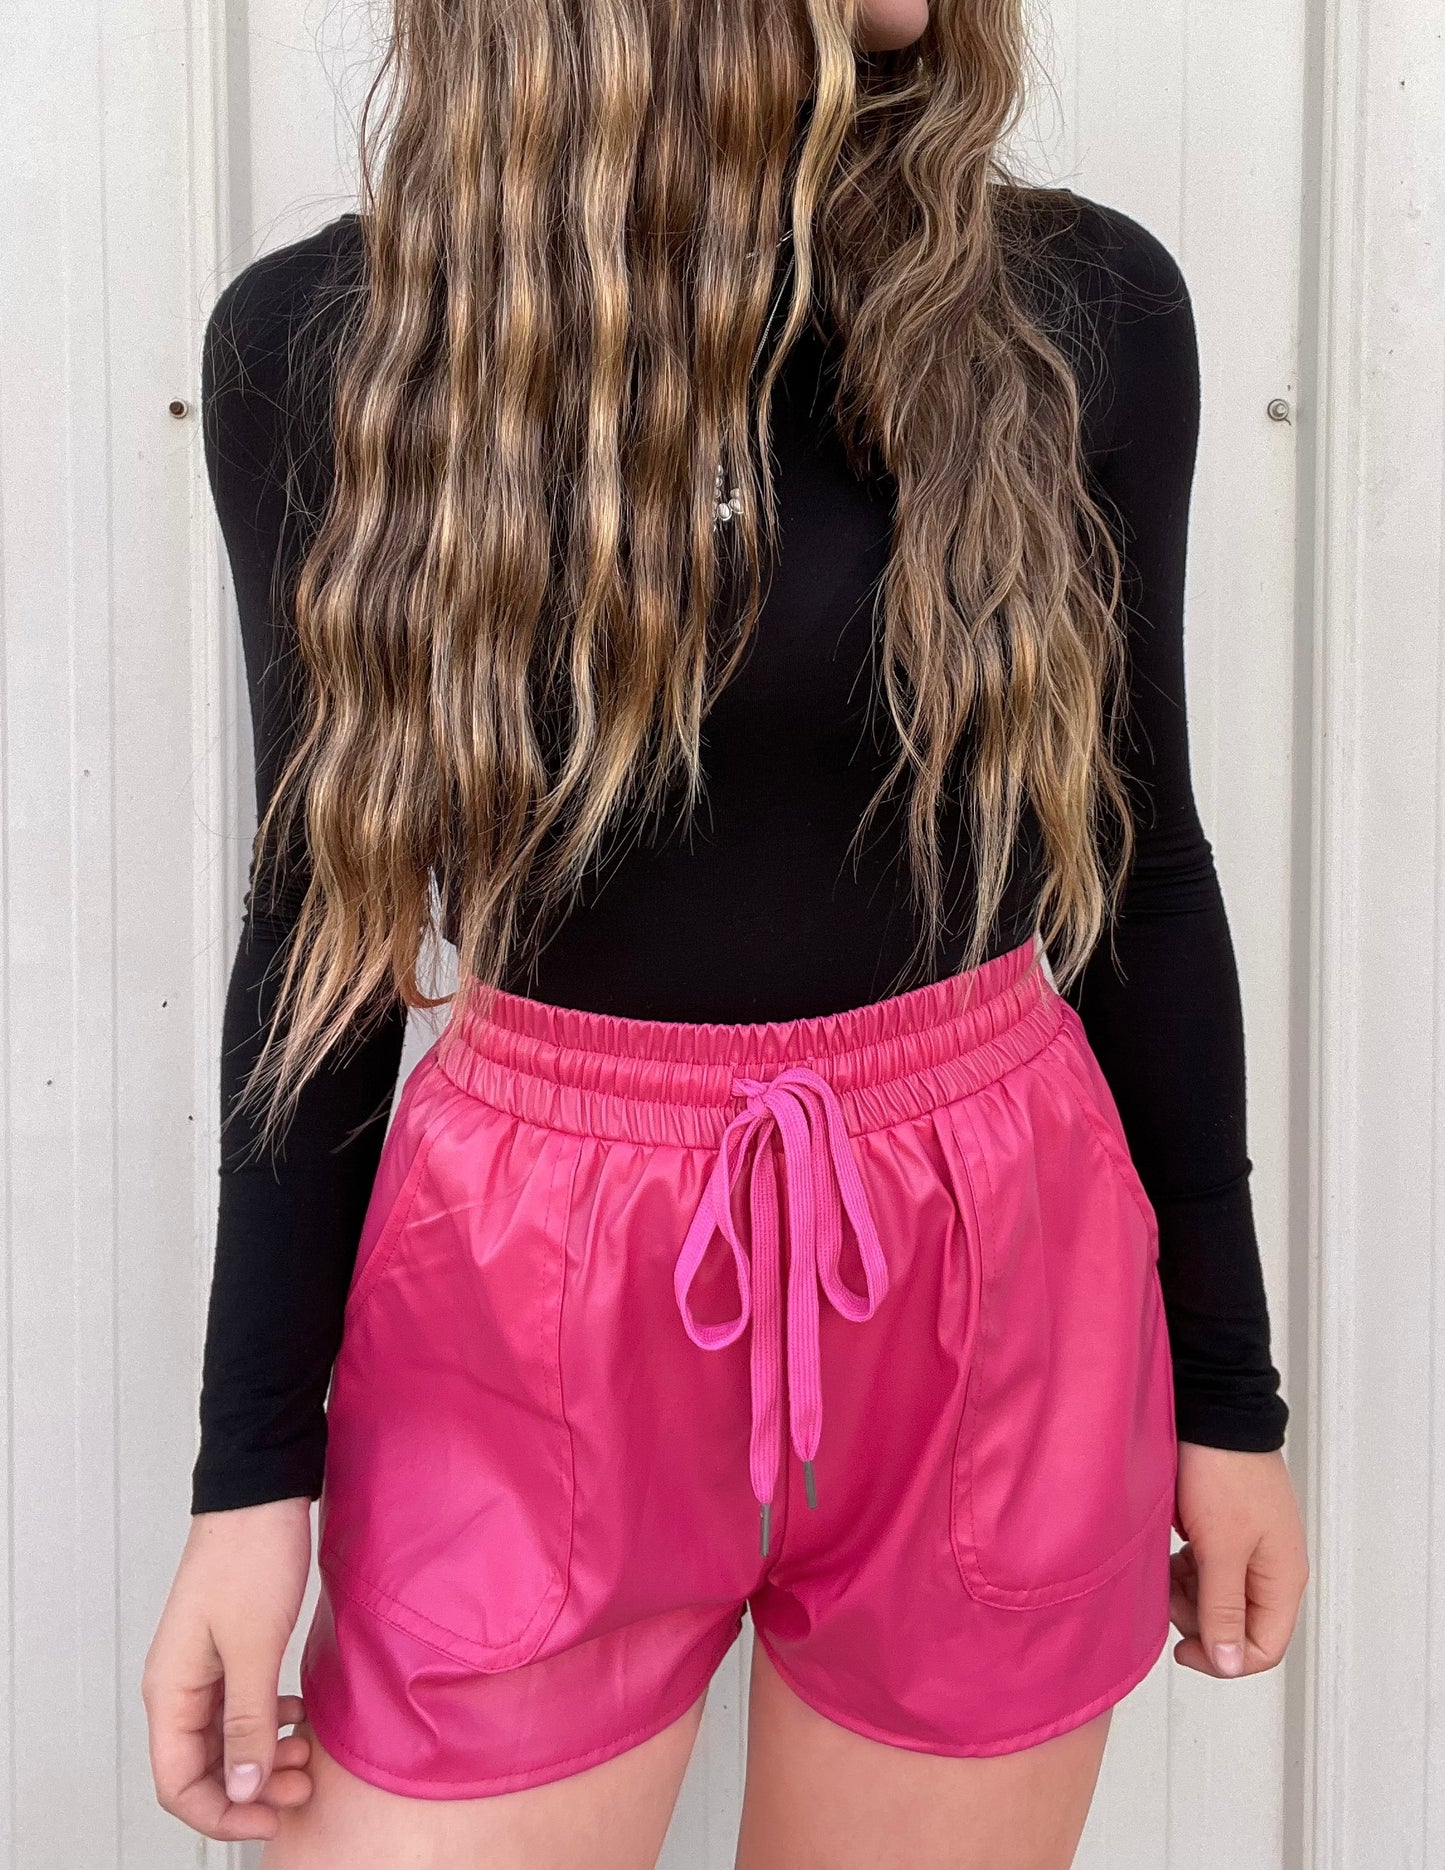 The Barbie Shorts